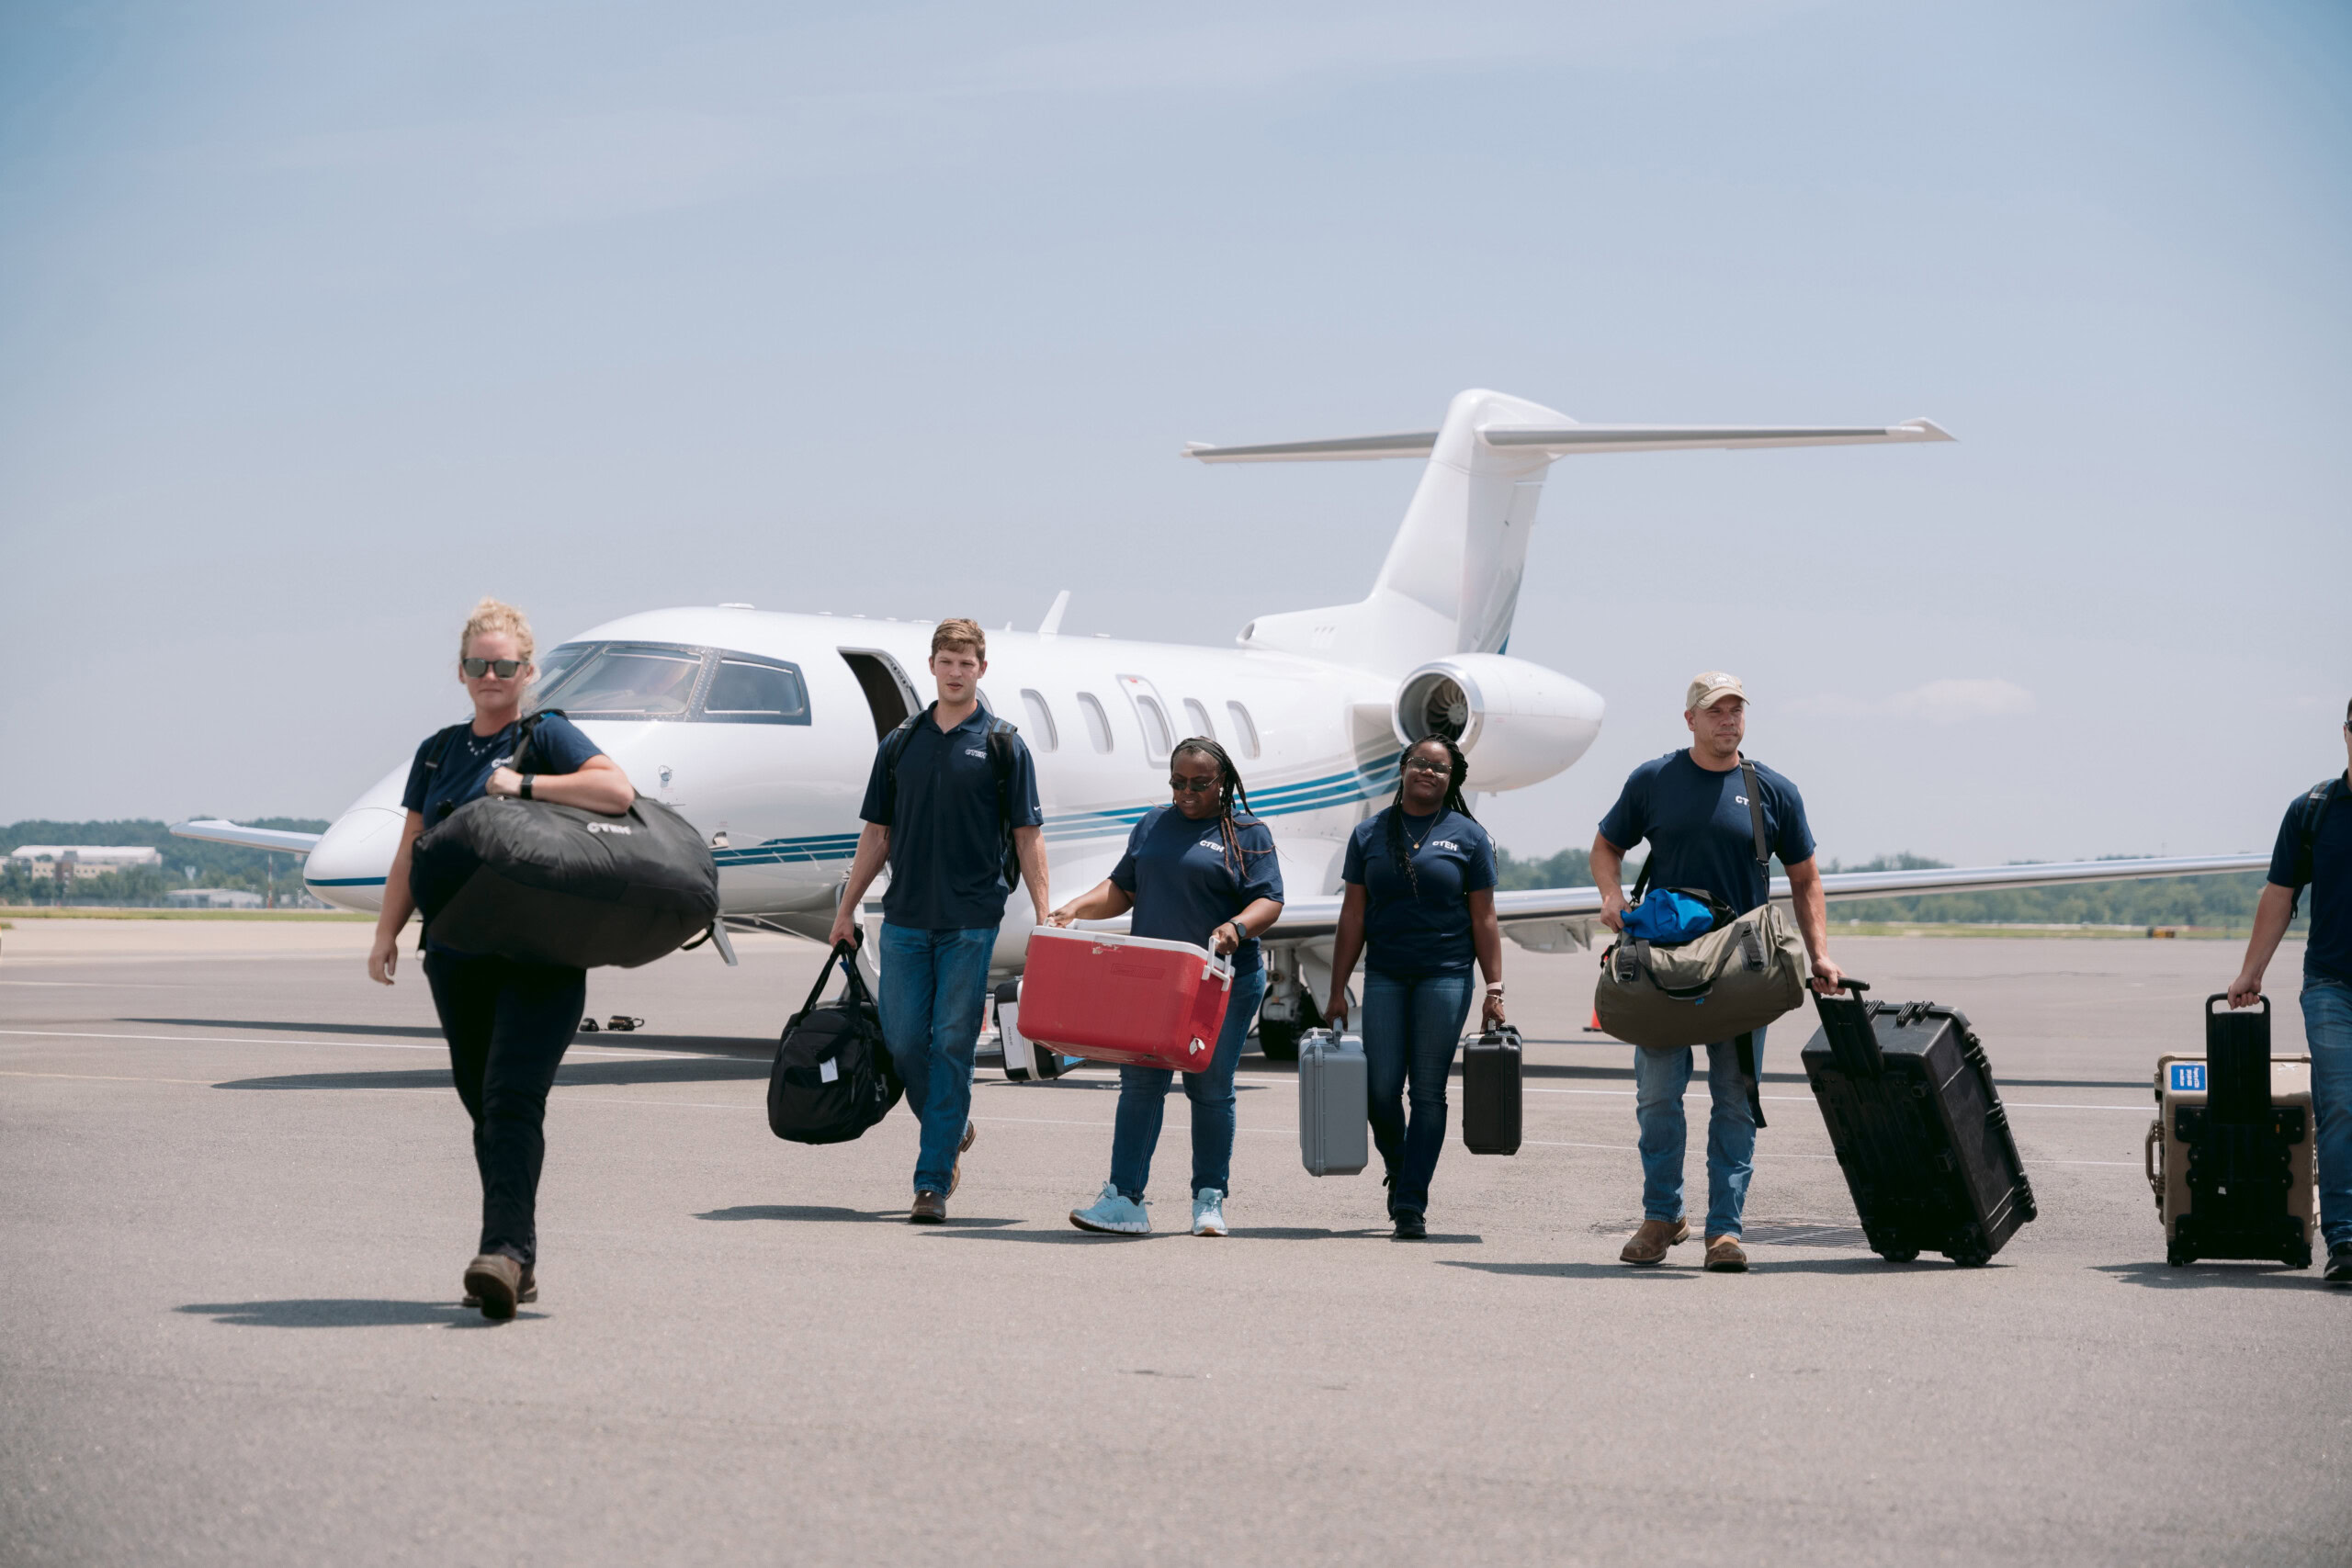 A group of six people in uniform walk on an airport tarmac, exuding readiness as they carry luggage and equipment. In the background, a small private jet is parked against a clear blue sky.